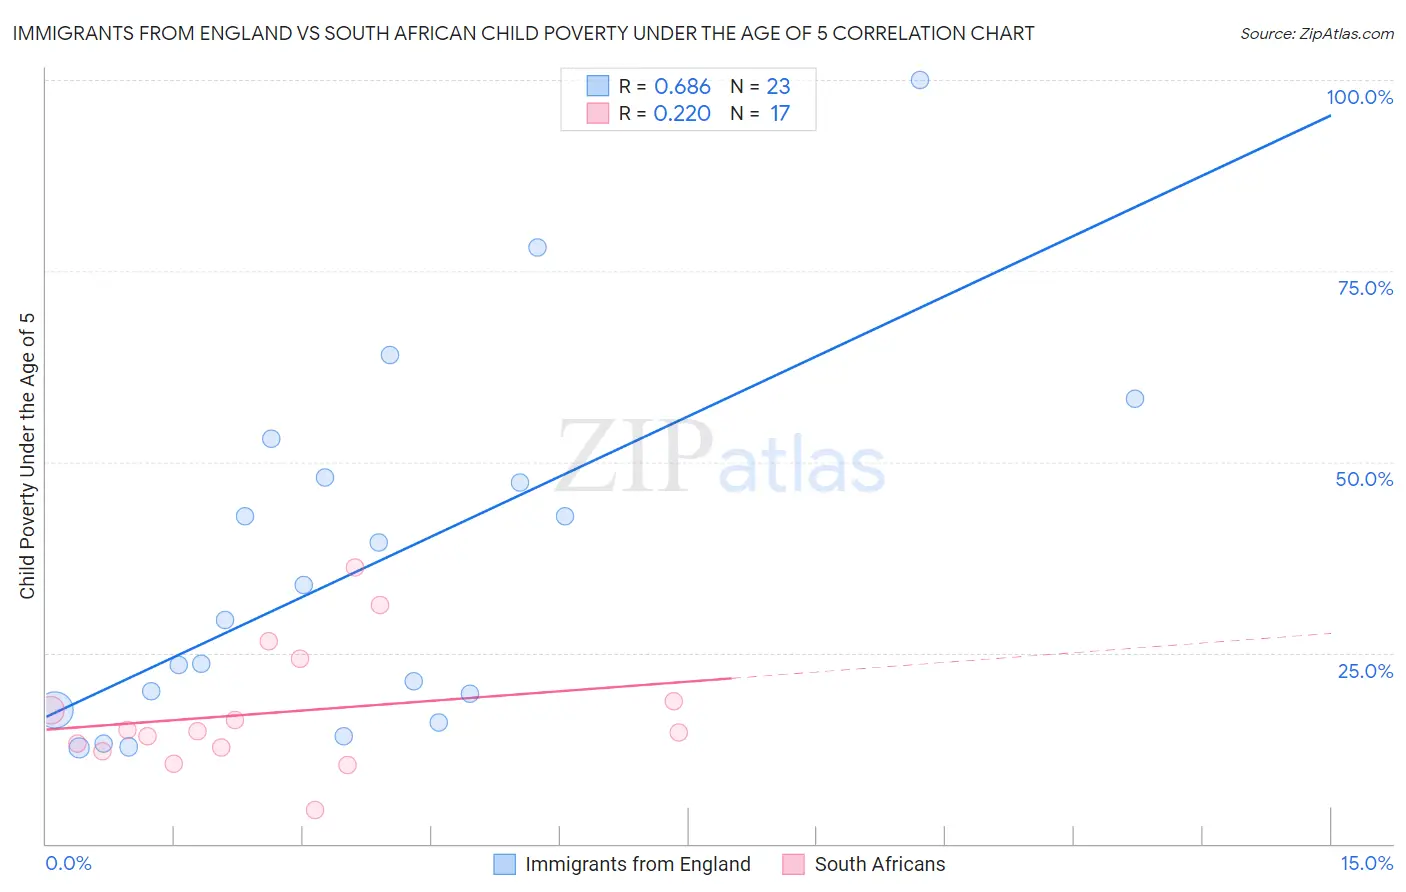 Immigrants from England vs South African Child Poverty Under the Age of 5